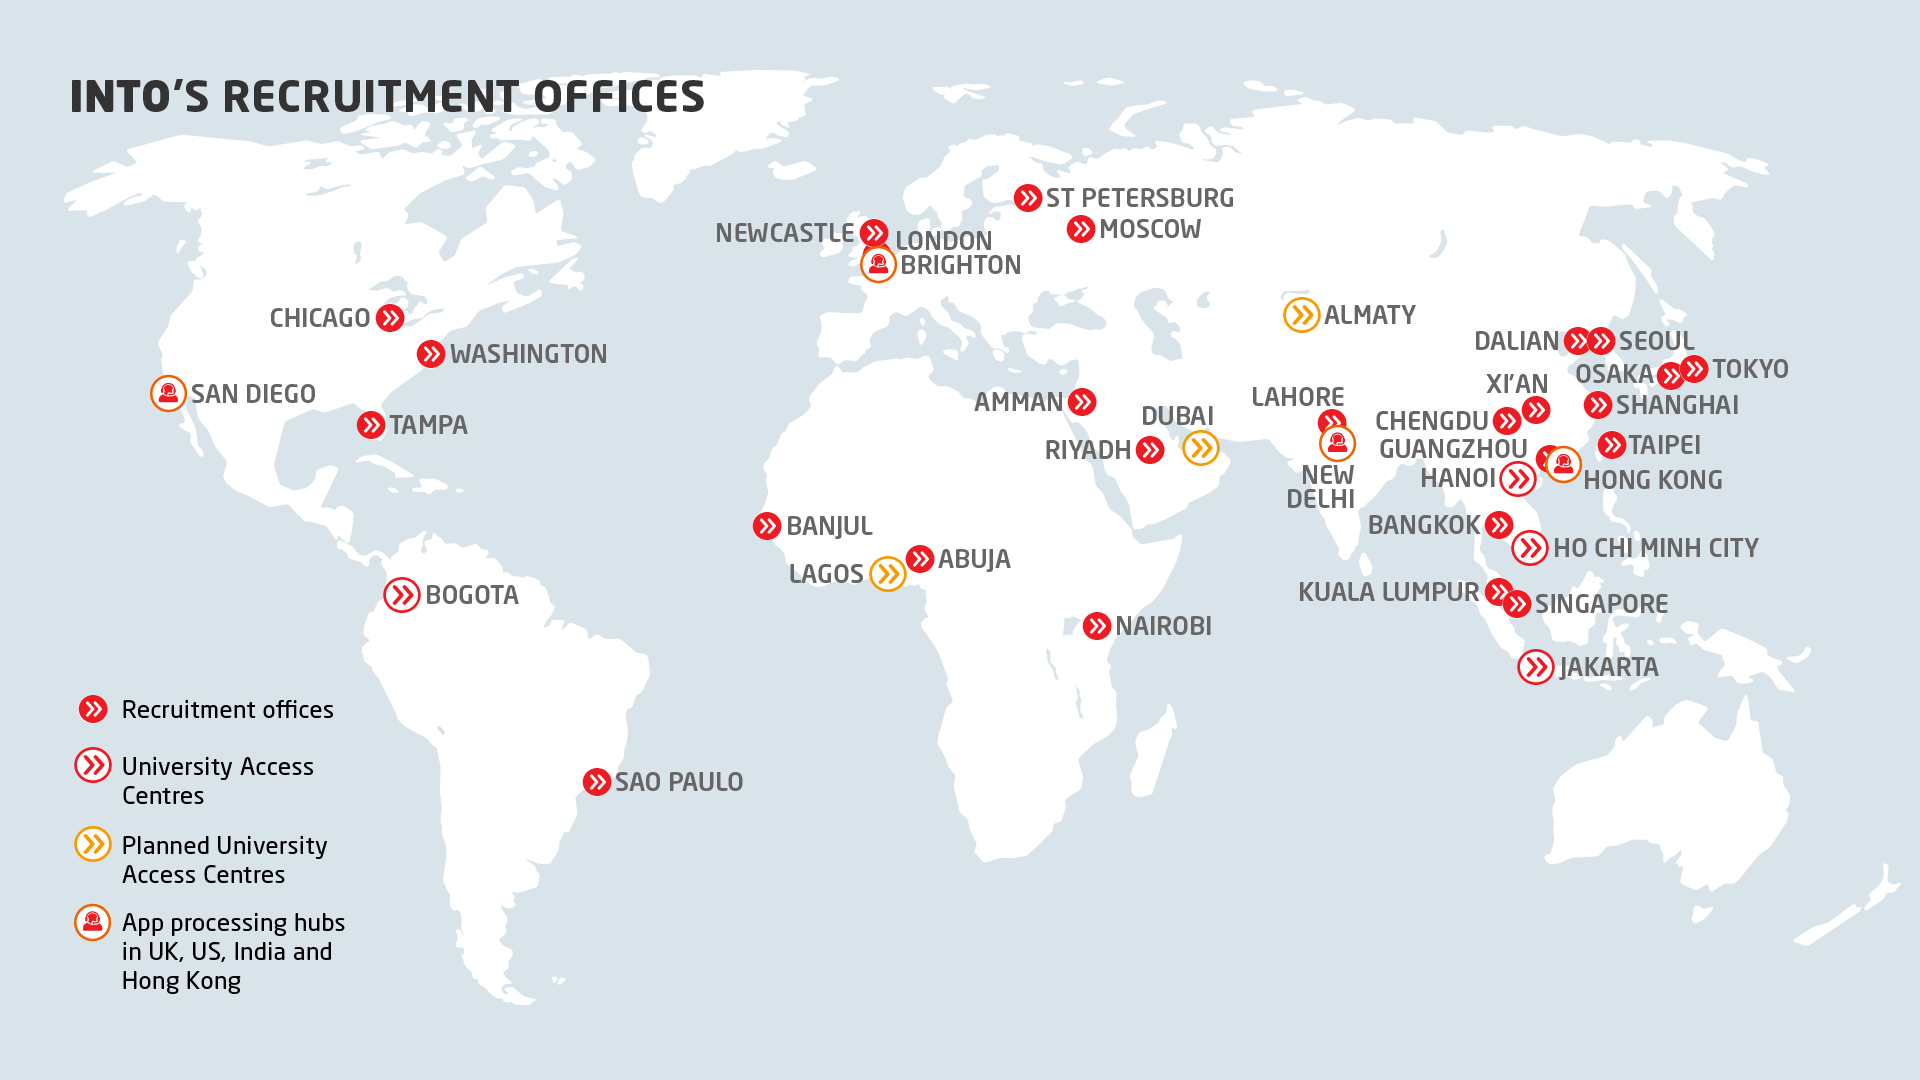 INTO recruitment offices map